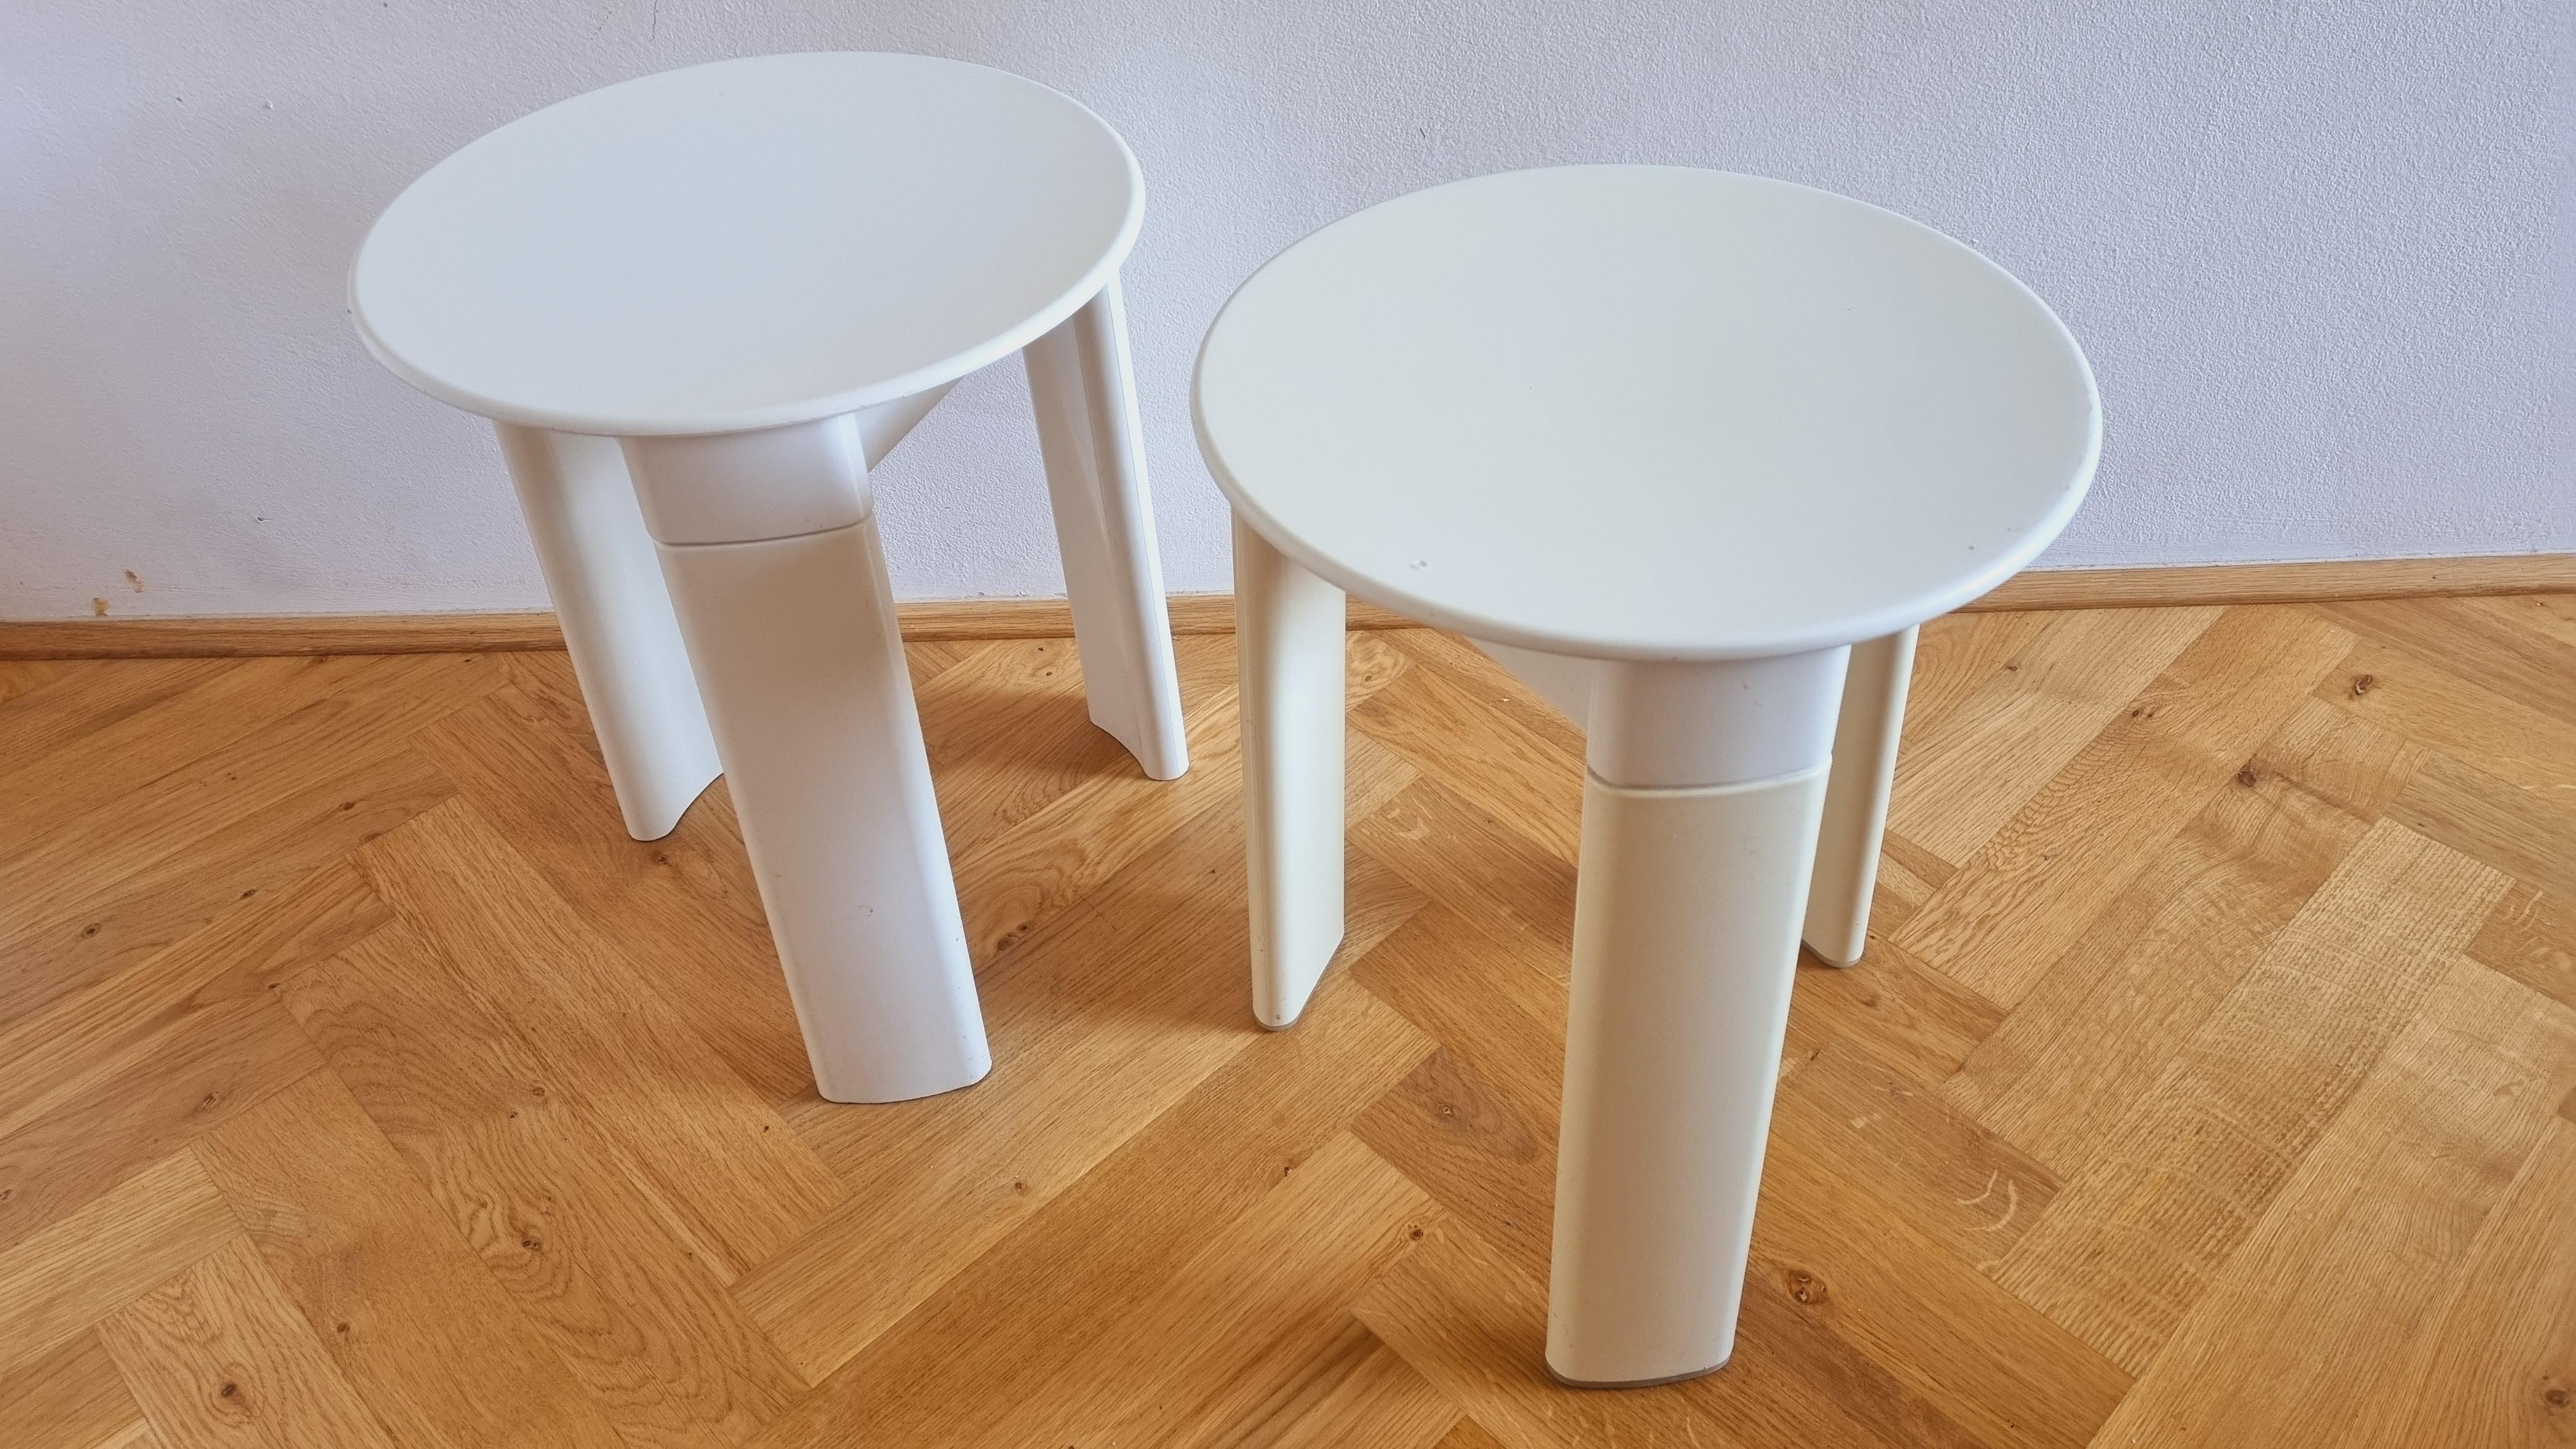 Pair of Midcentury Stools or Side Tables Trio, Olaf Von Bohr, Gedy, Italy, 1970s For Sale 2